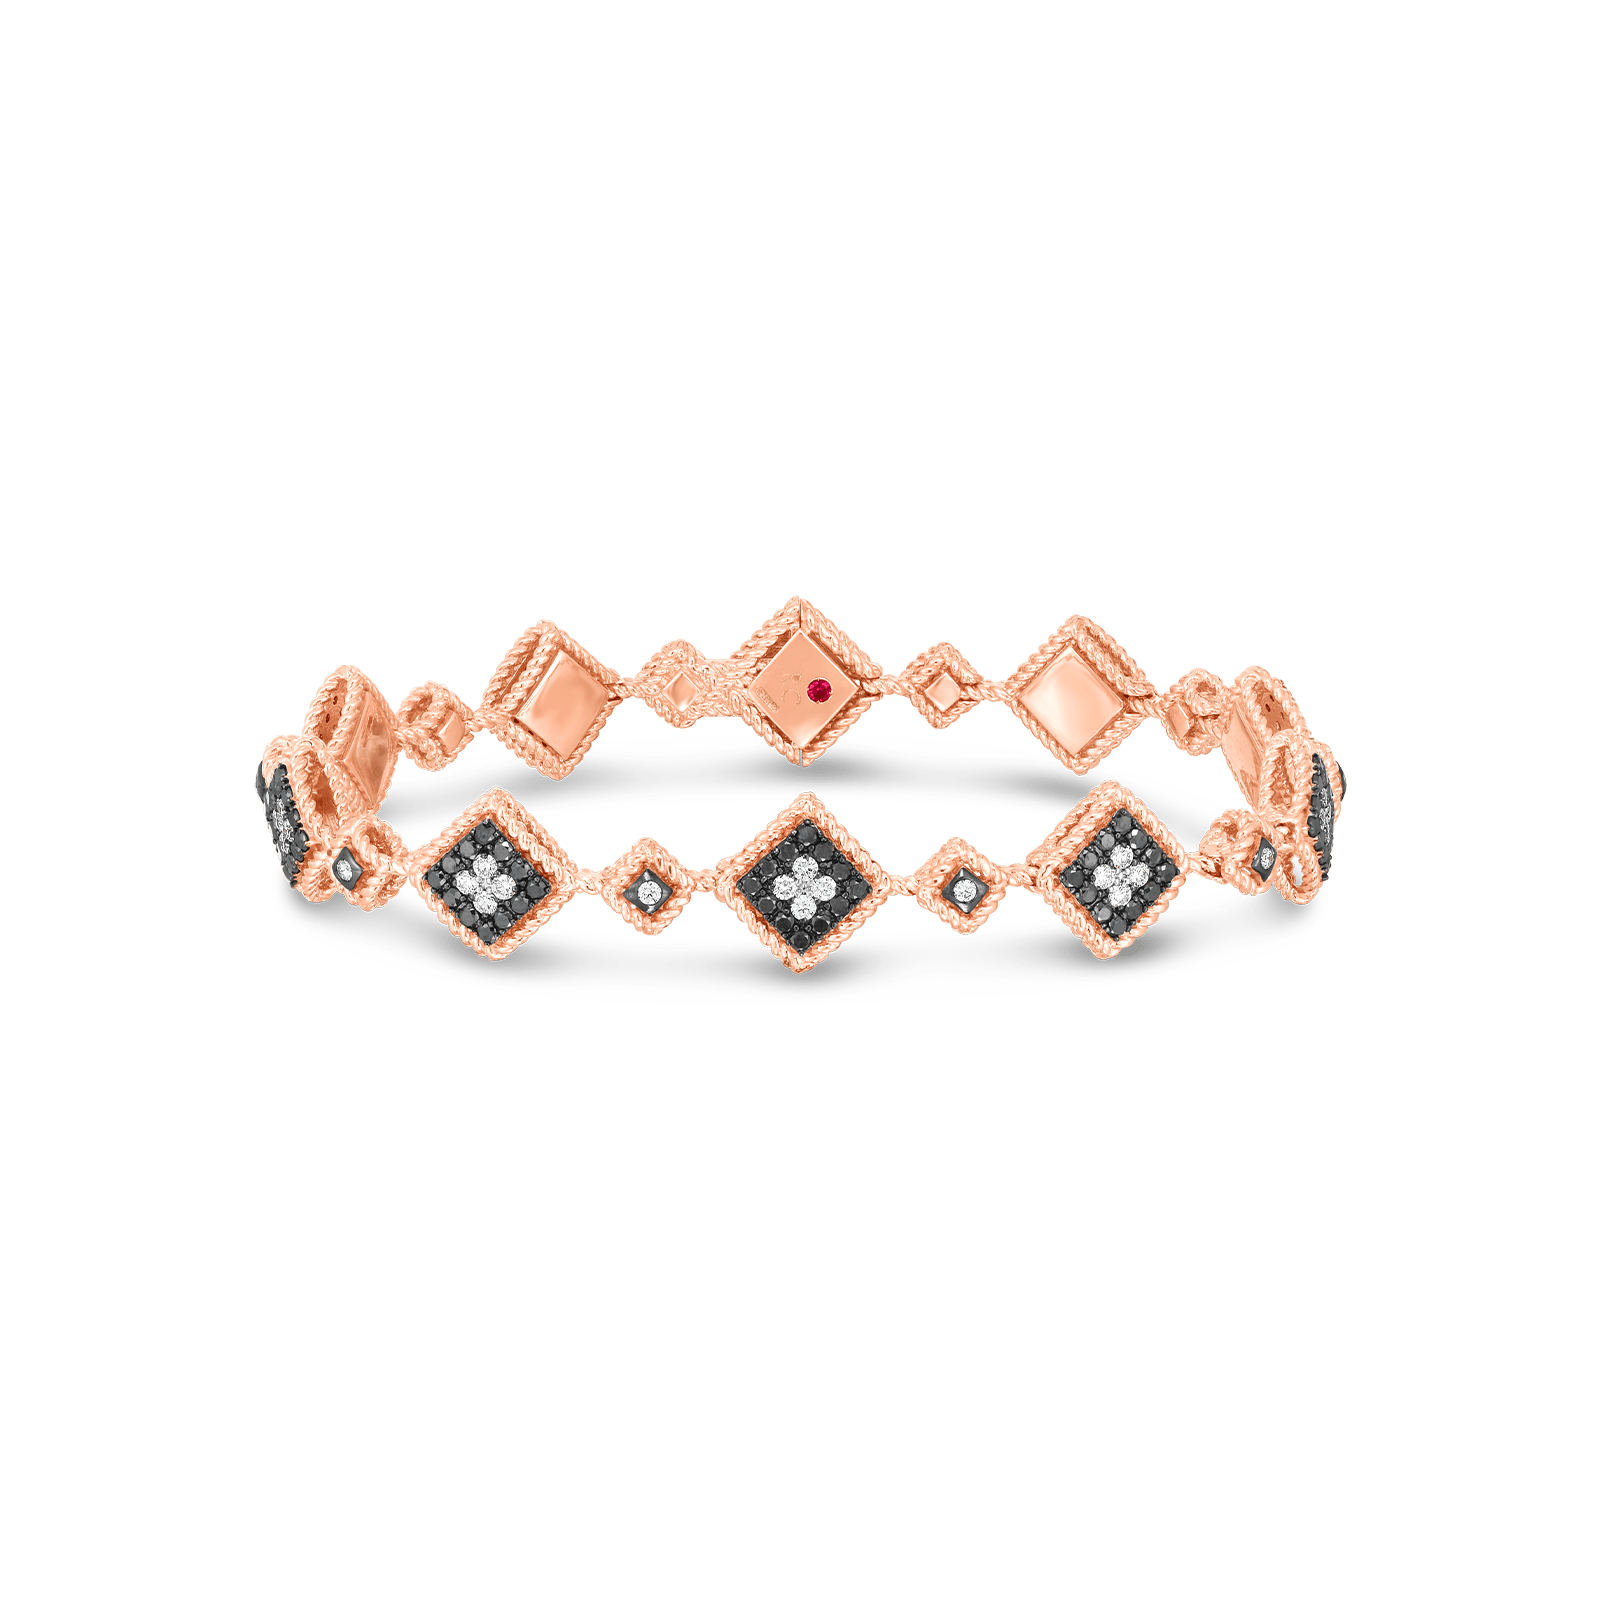 Palazzo Ducale Black and White Diamond Alternating Squares Bracelet in 18kt Rose Gold